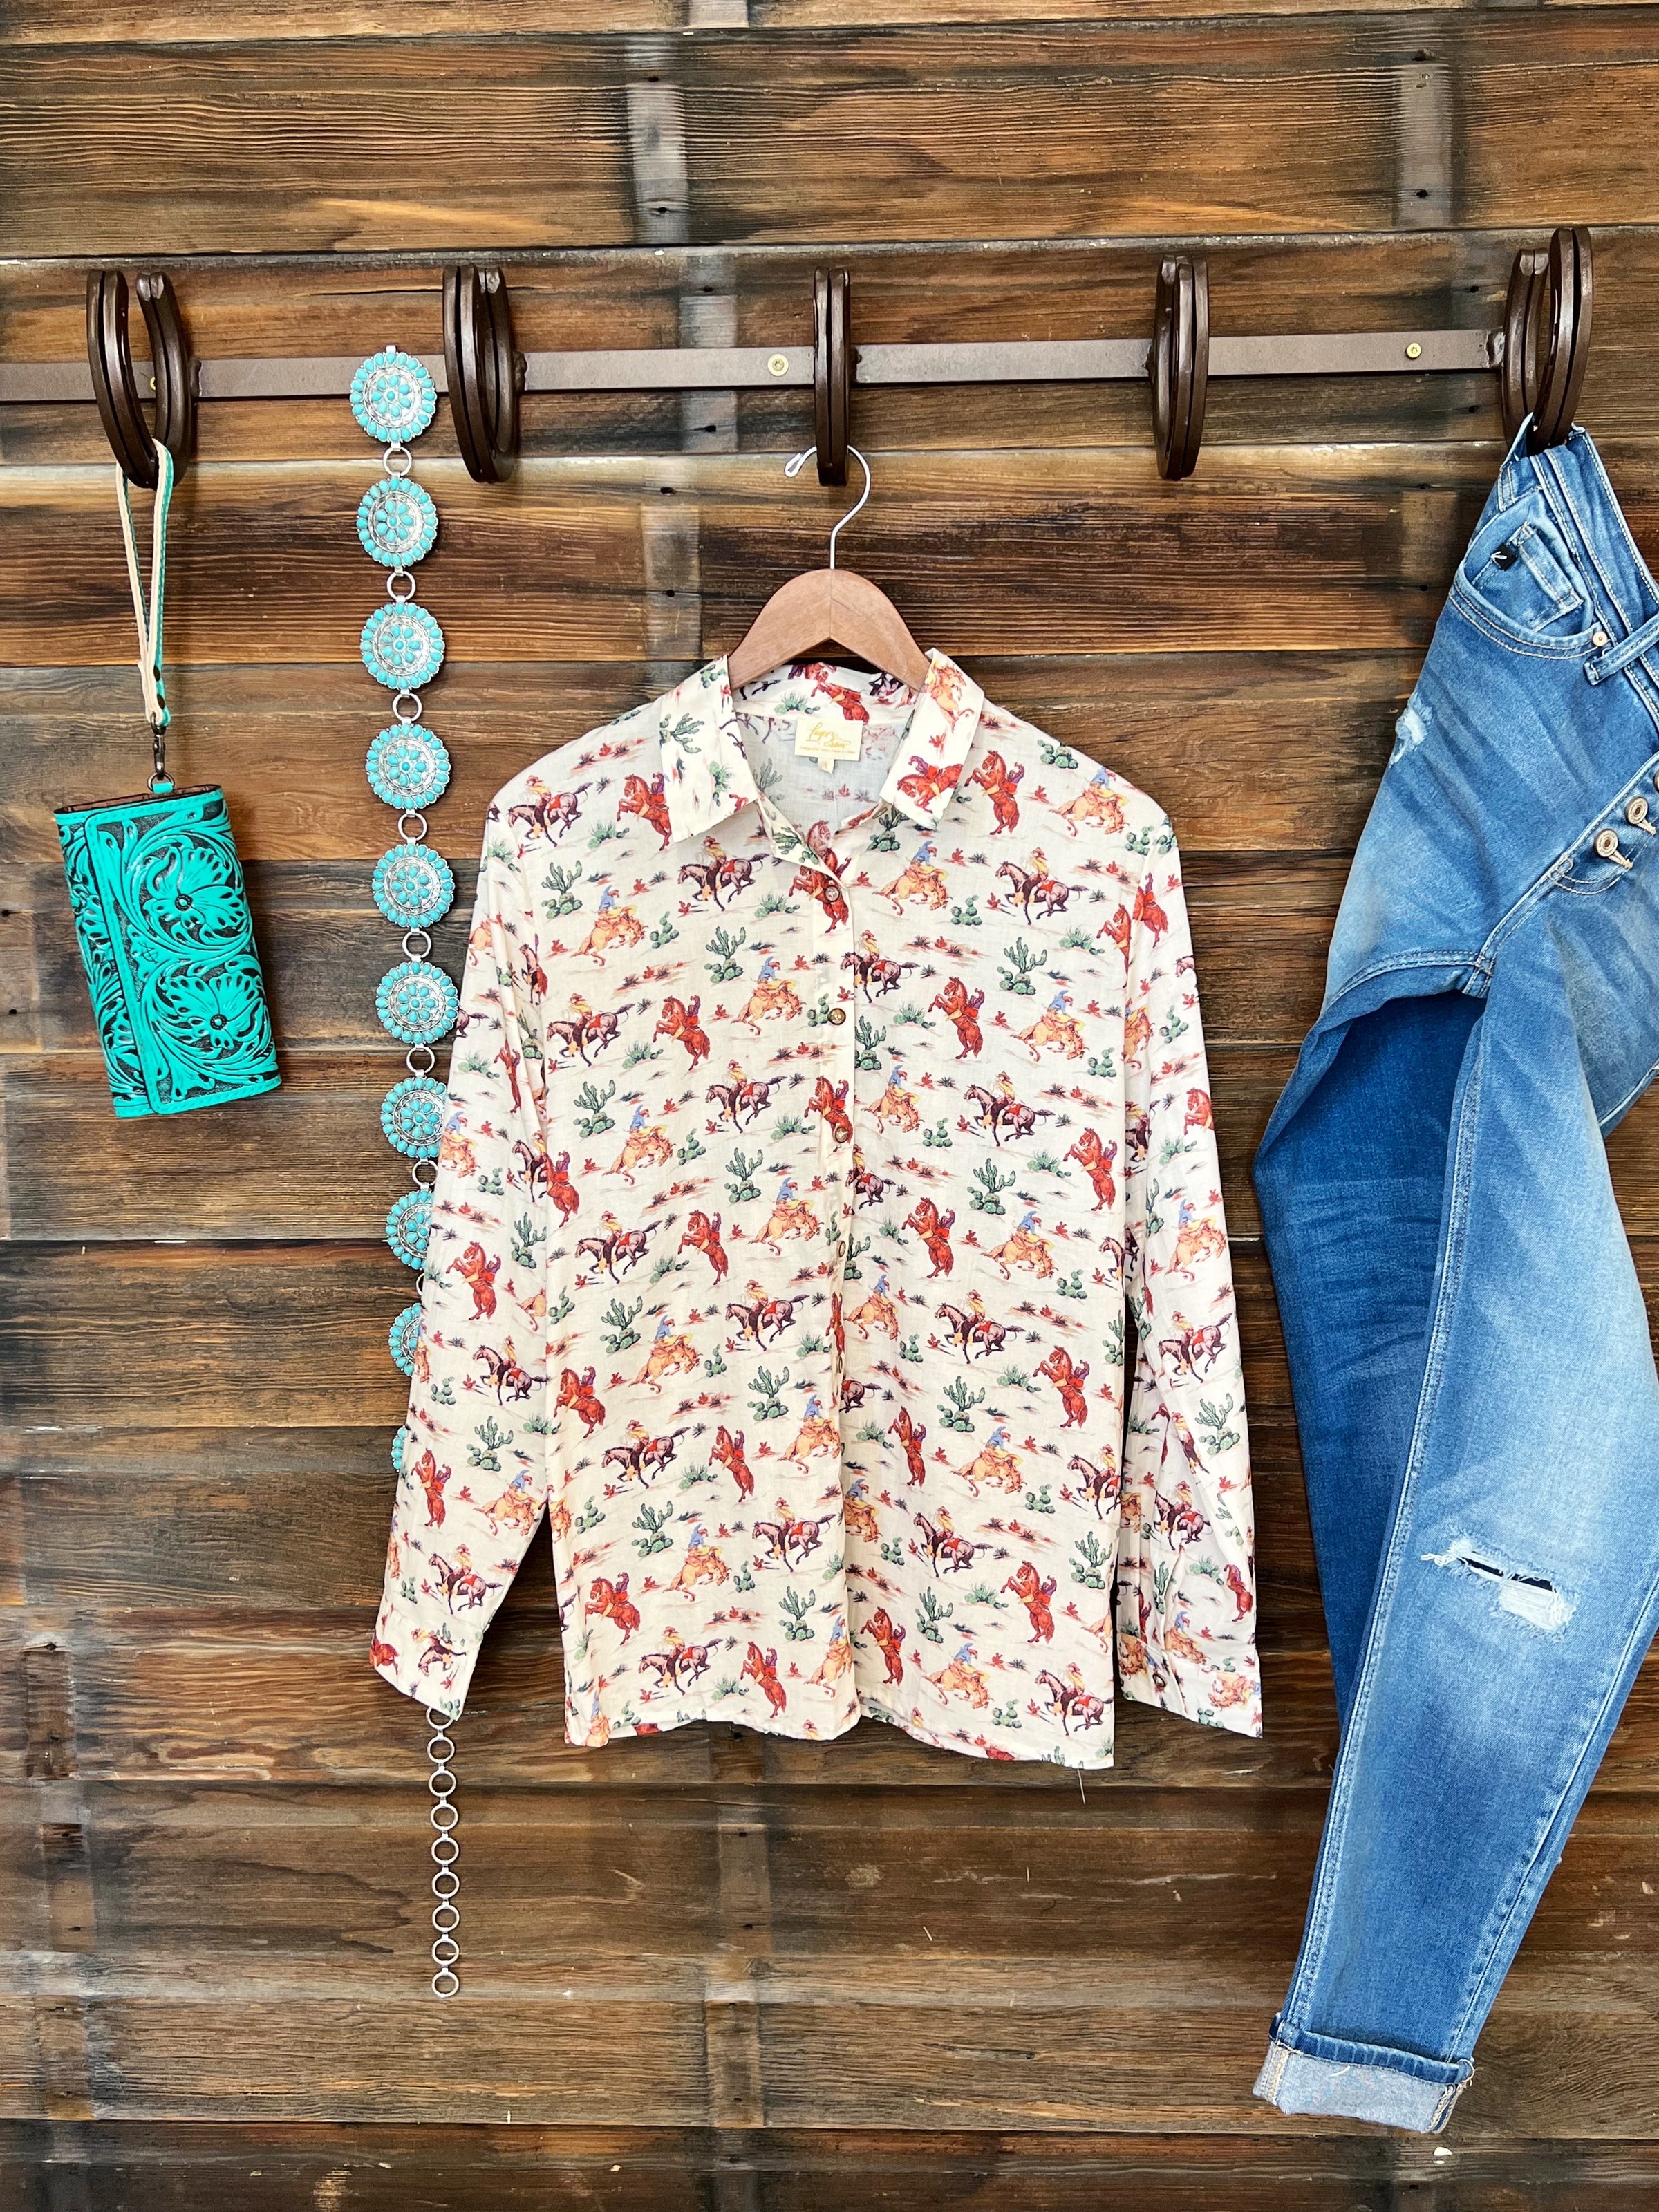 The Wild West Button Up Top